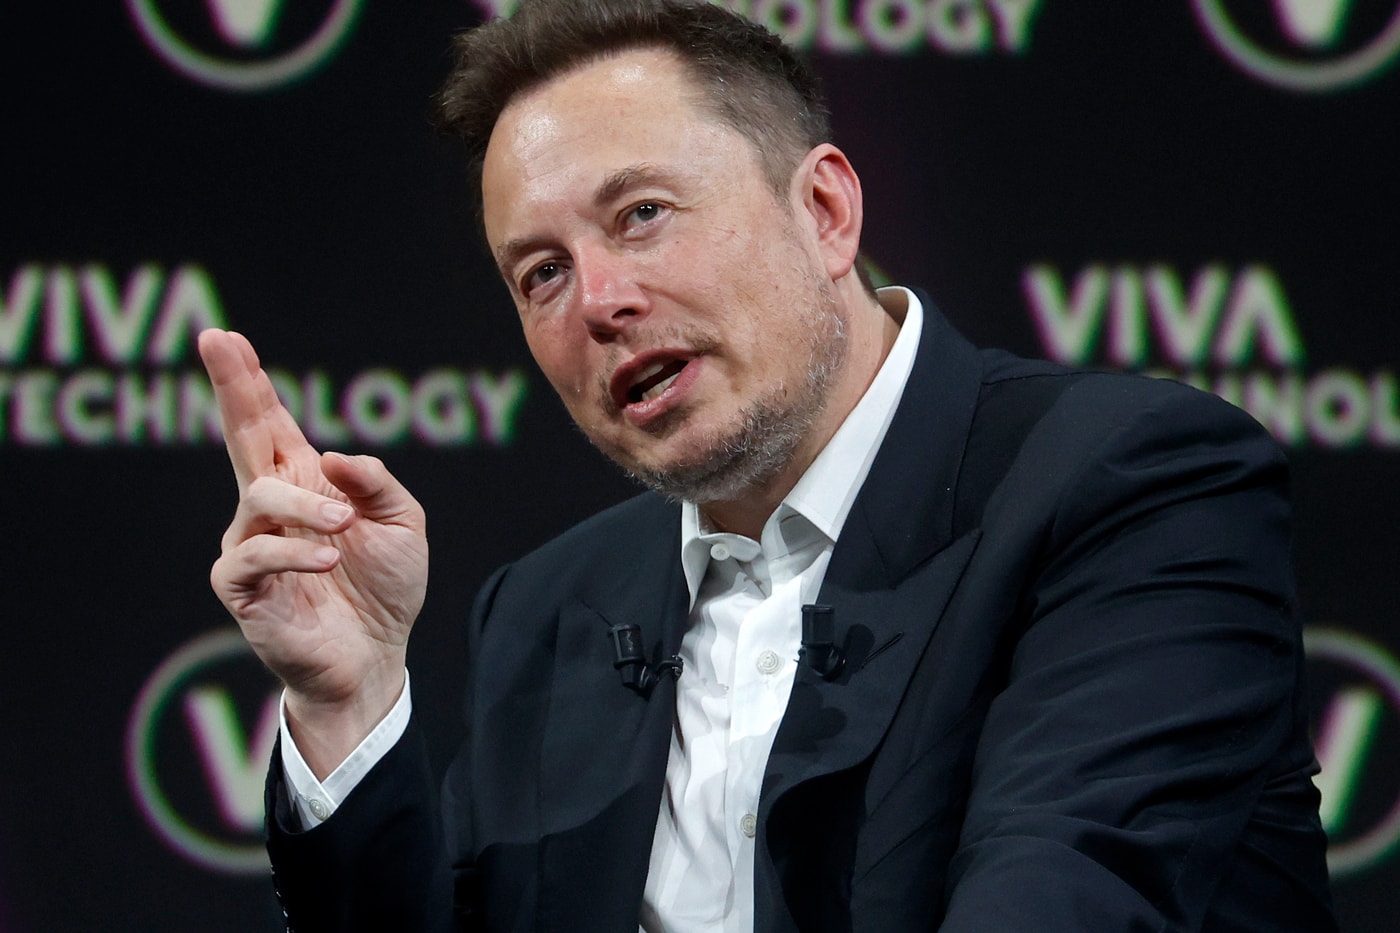 Elon Musk's Neuralink Is Ready for Its First Brain Implant Surgery volunteers ceo tesla spacex twitter x